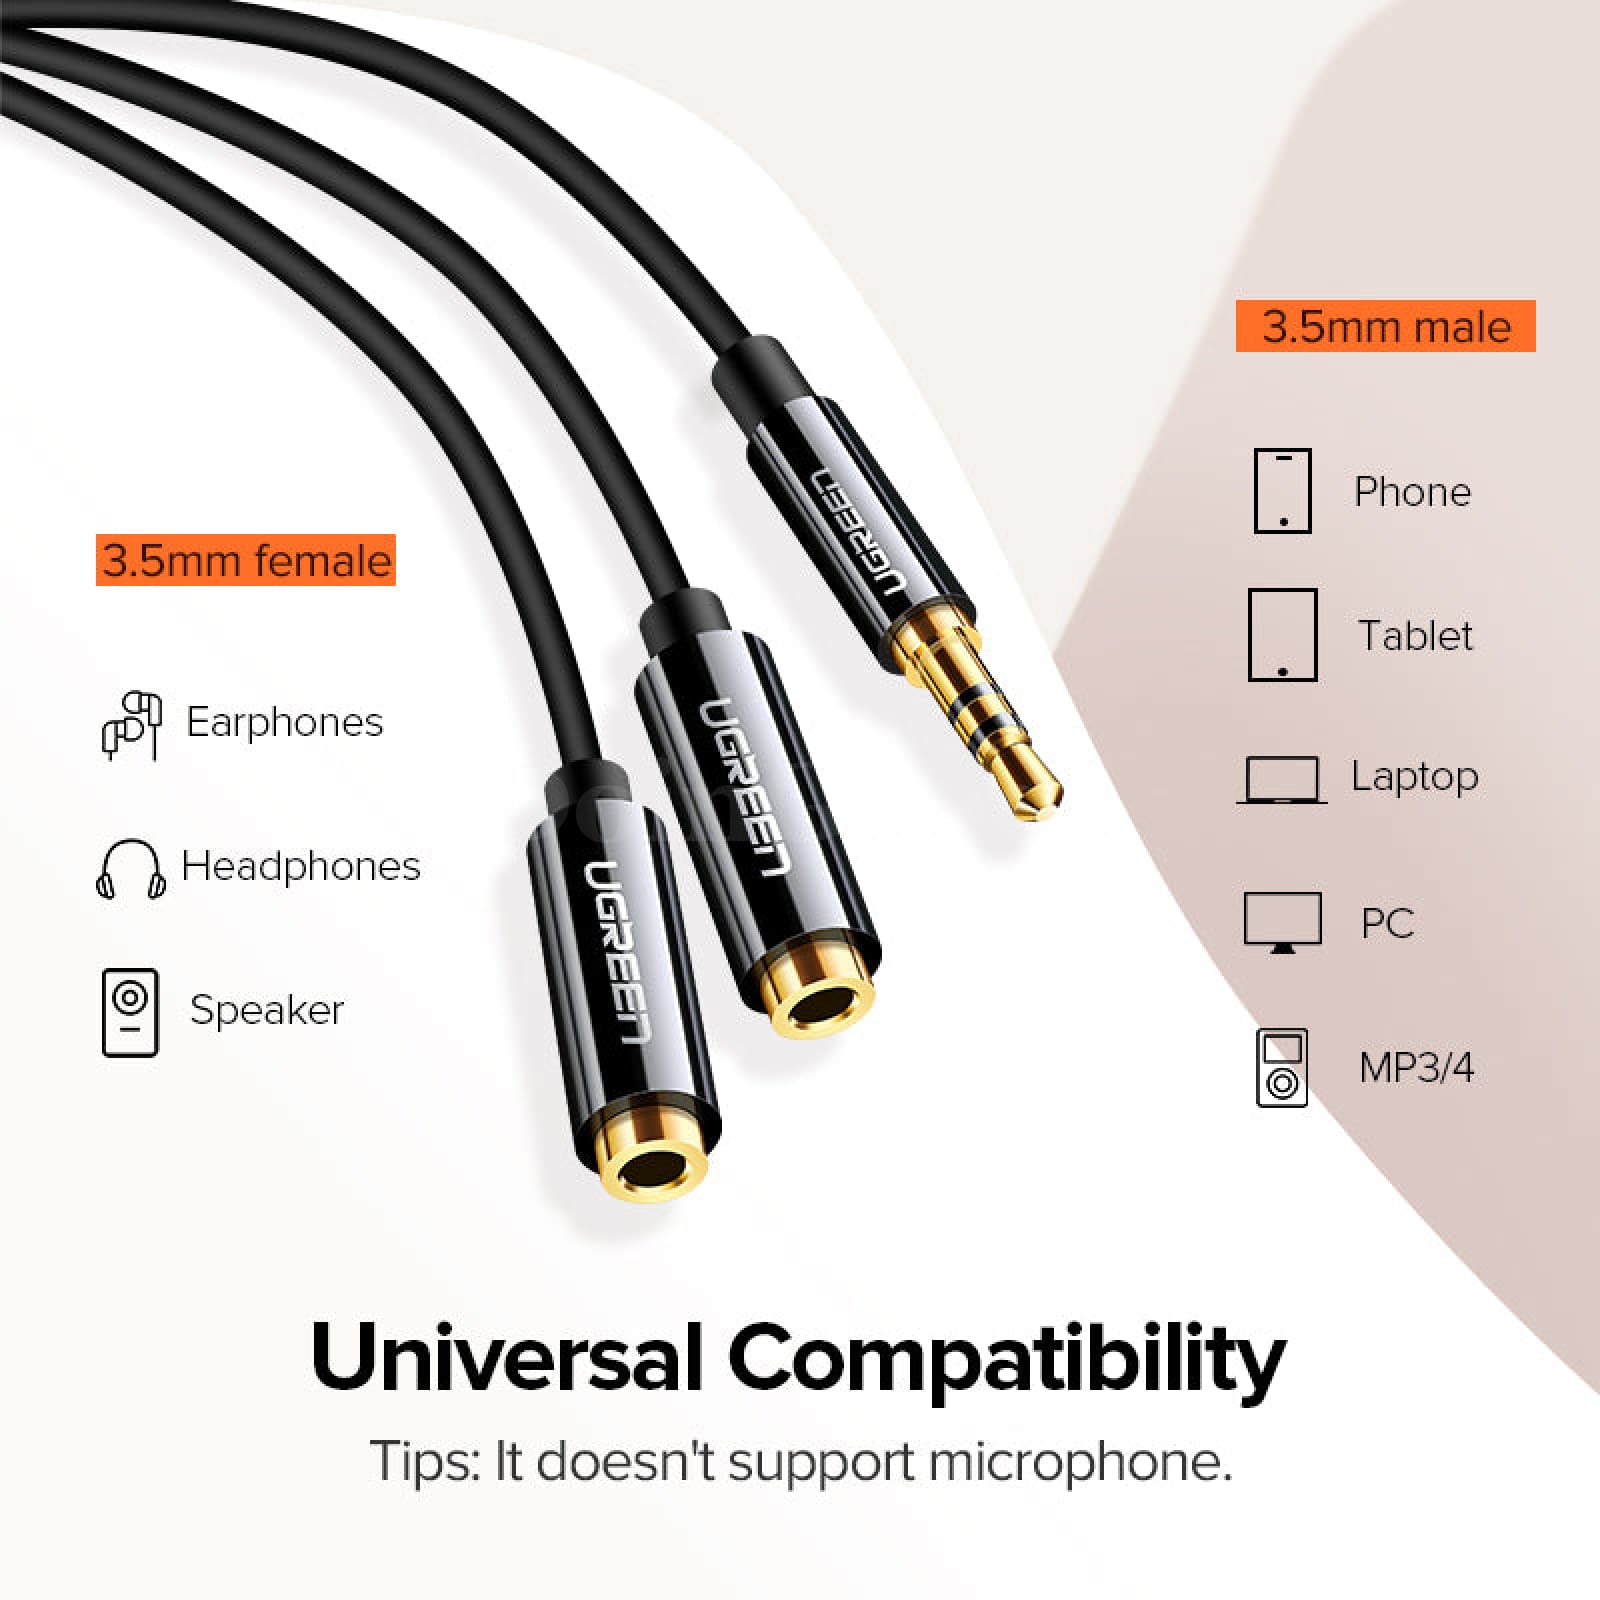 Ugreen 3.5Mm Male To Female Splitter 2 Audio Headphone Y Cable Adapter Aux Plug 301635